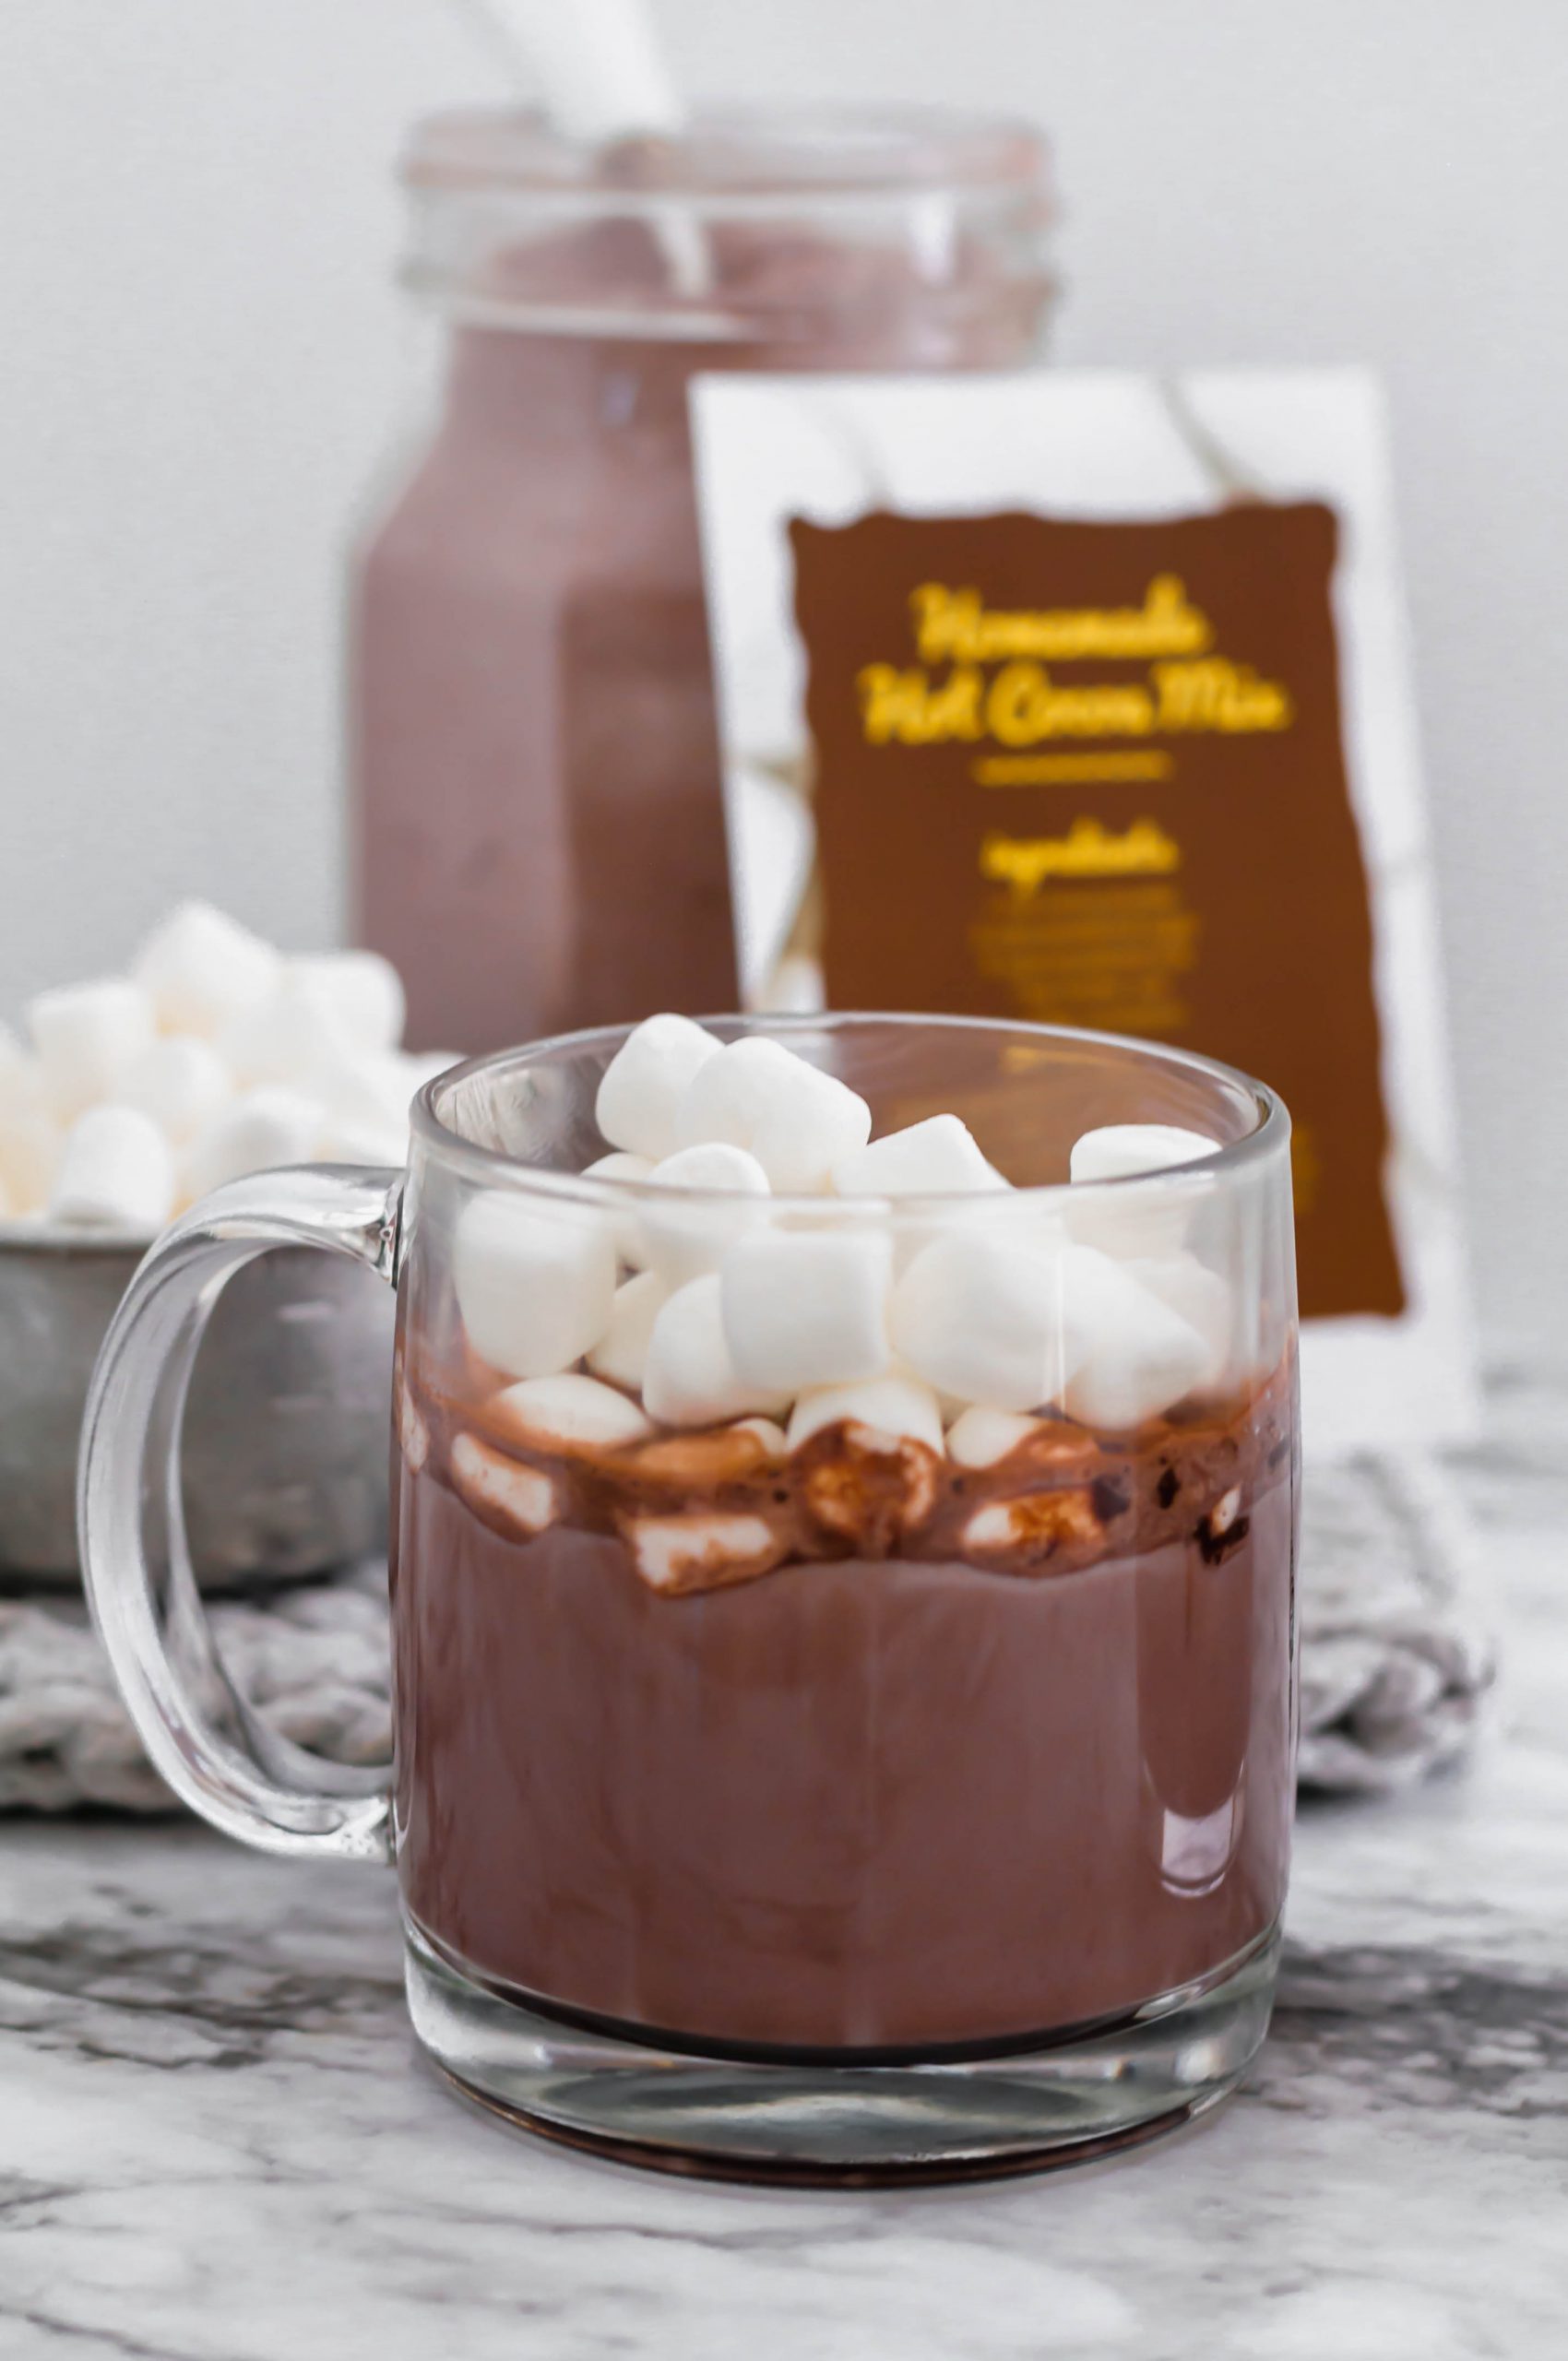 Skip the store-bought mix and make your own Hot Cocoa Mix. Only 5 ingredients and a minute to mix. The creamiest, richest hot cocoa around with a free printable for gifting.